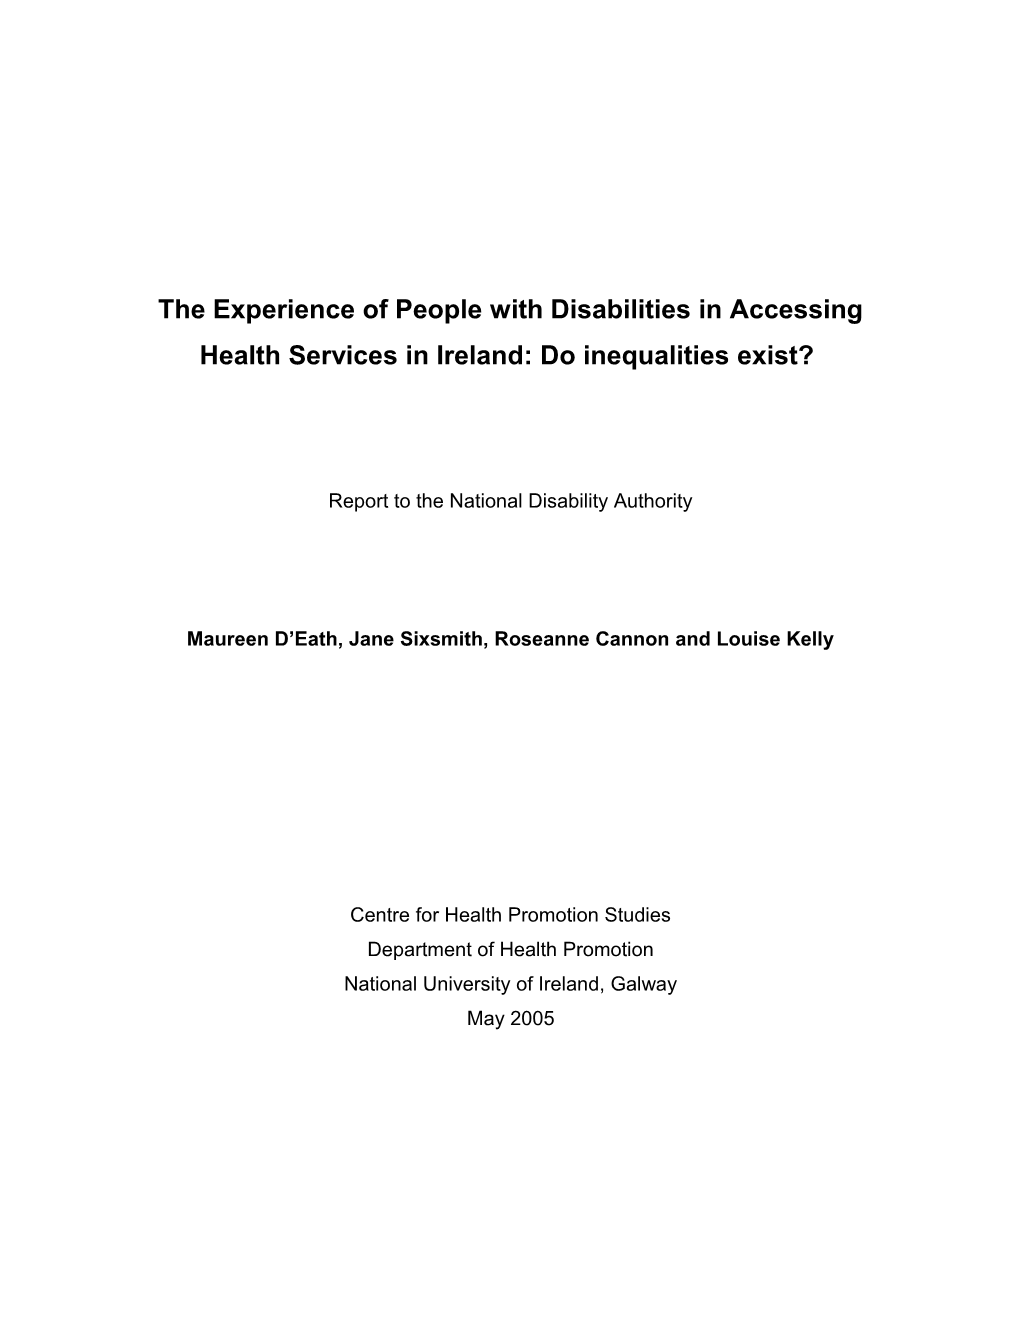 The Experience of People with Disabilities in Accessing Health Services in Ireland: Do